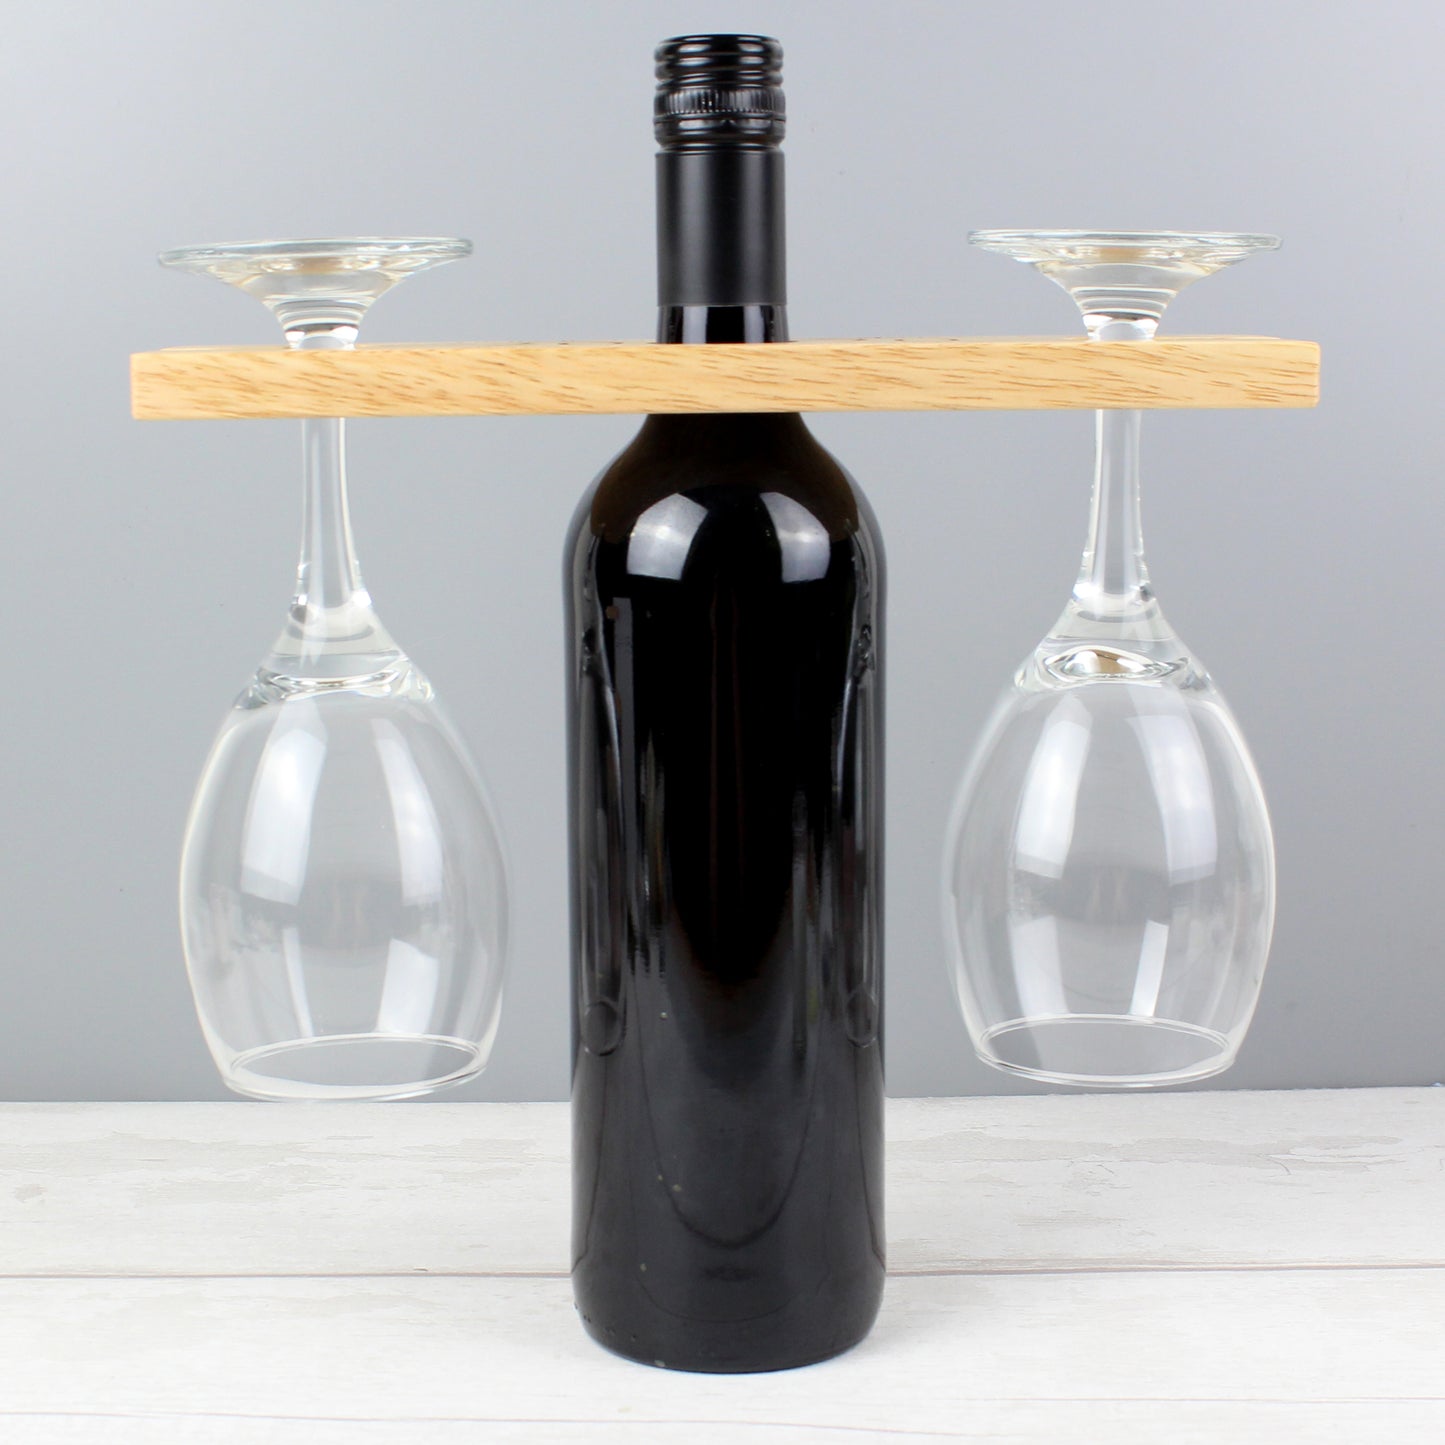 Personalised 'Year' Wine Glass & Bottle Butler - Personalise It!